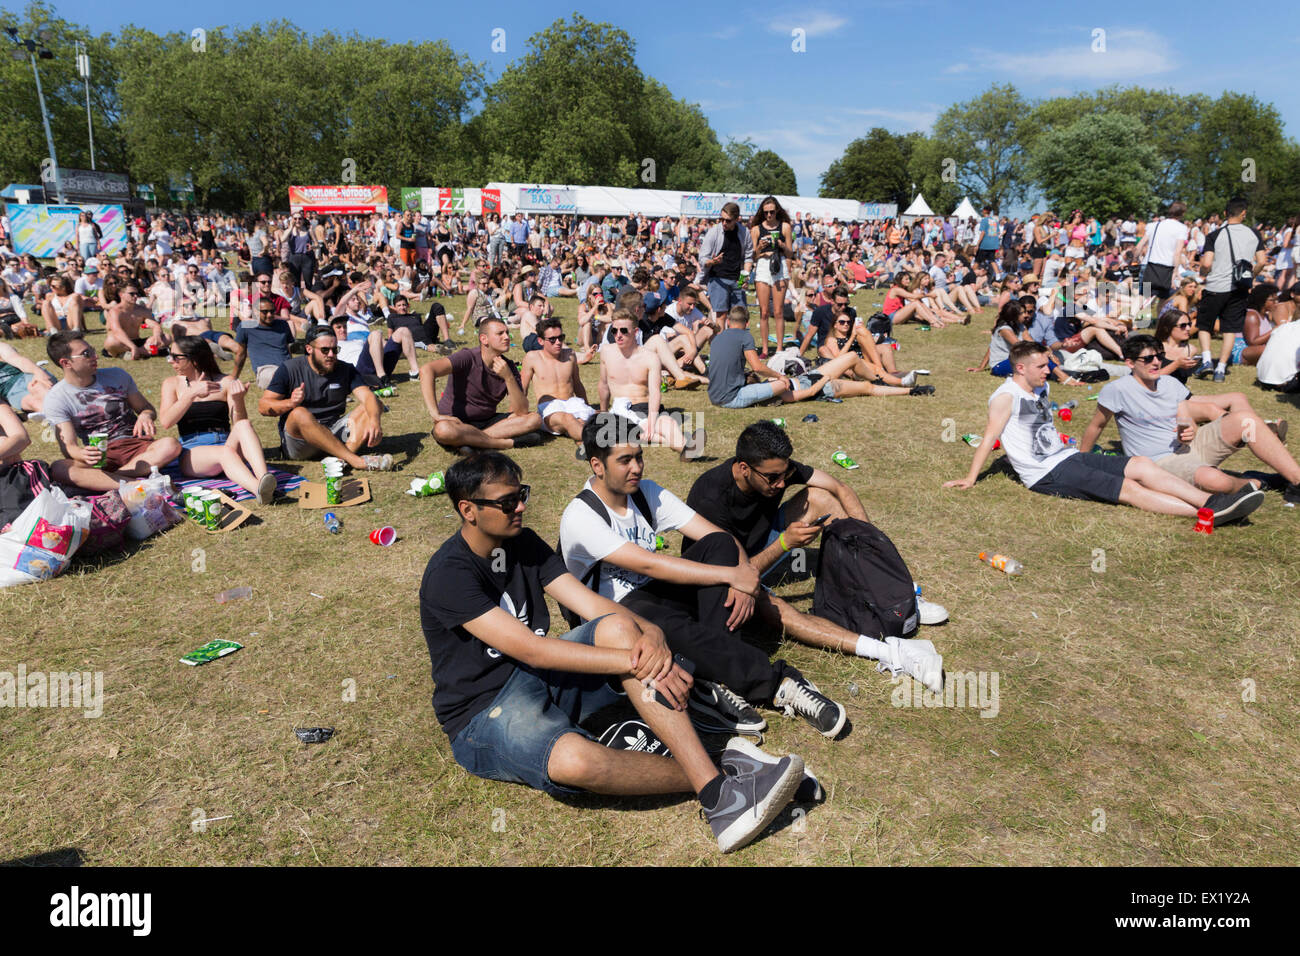 London, UK, 4th July 2015. New Look Wireless Festival, Finsbury Park  Credit: Robert Stainforth/Alamy Live News Stock Photo - Alamy